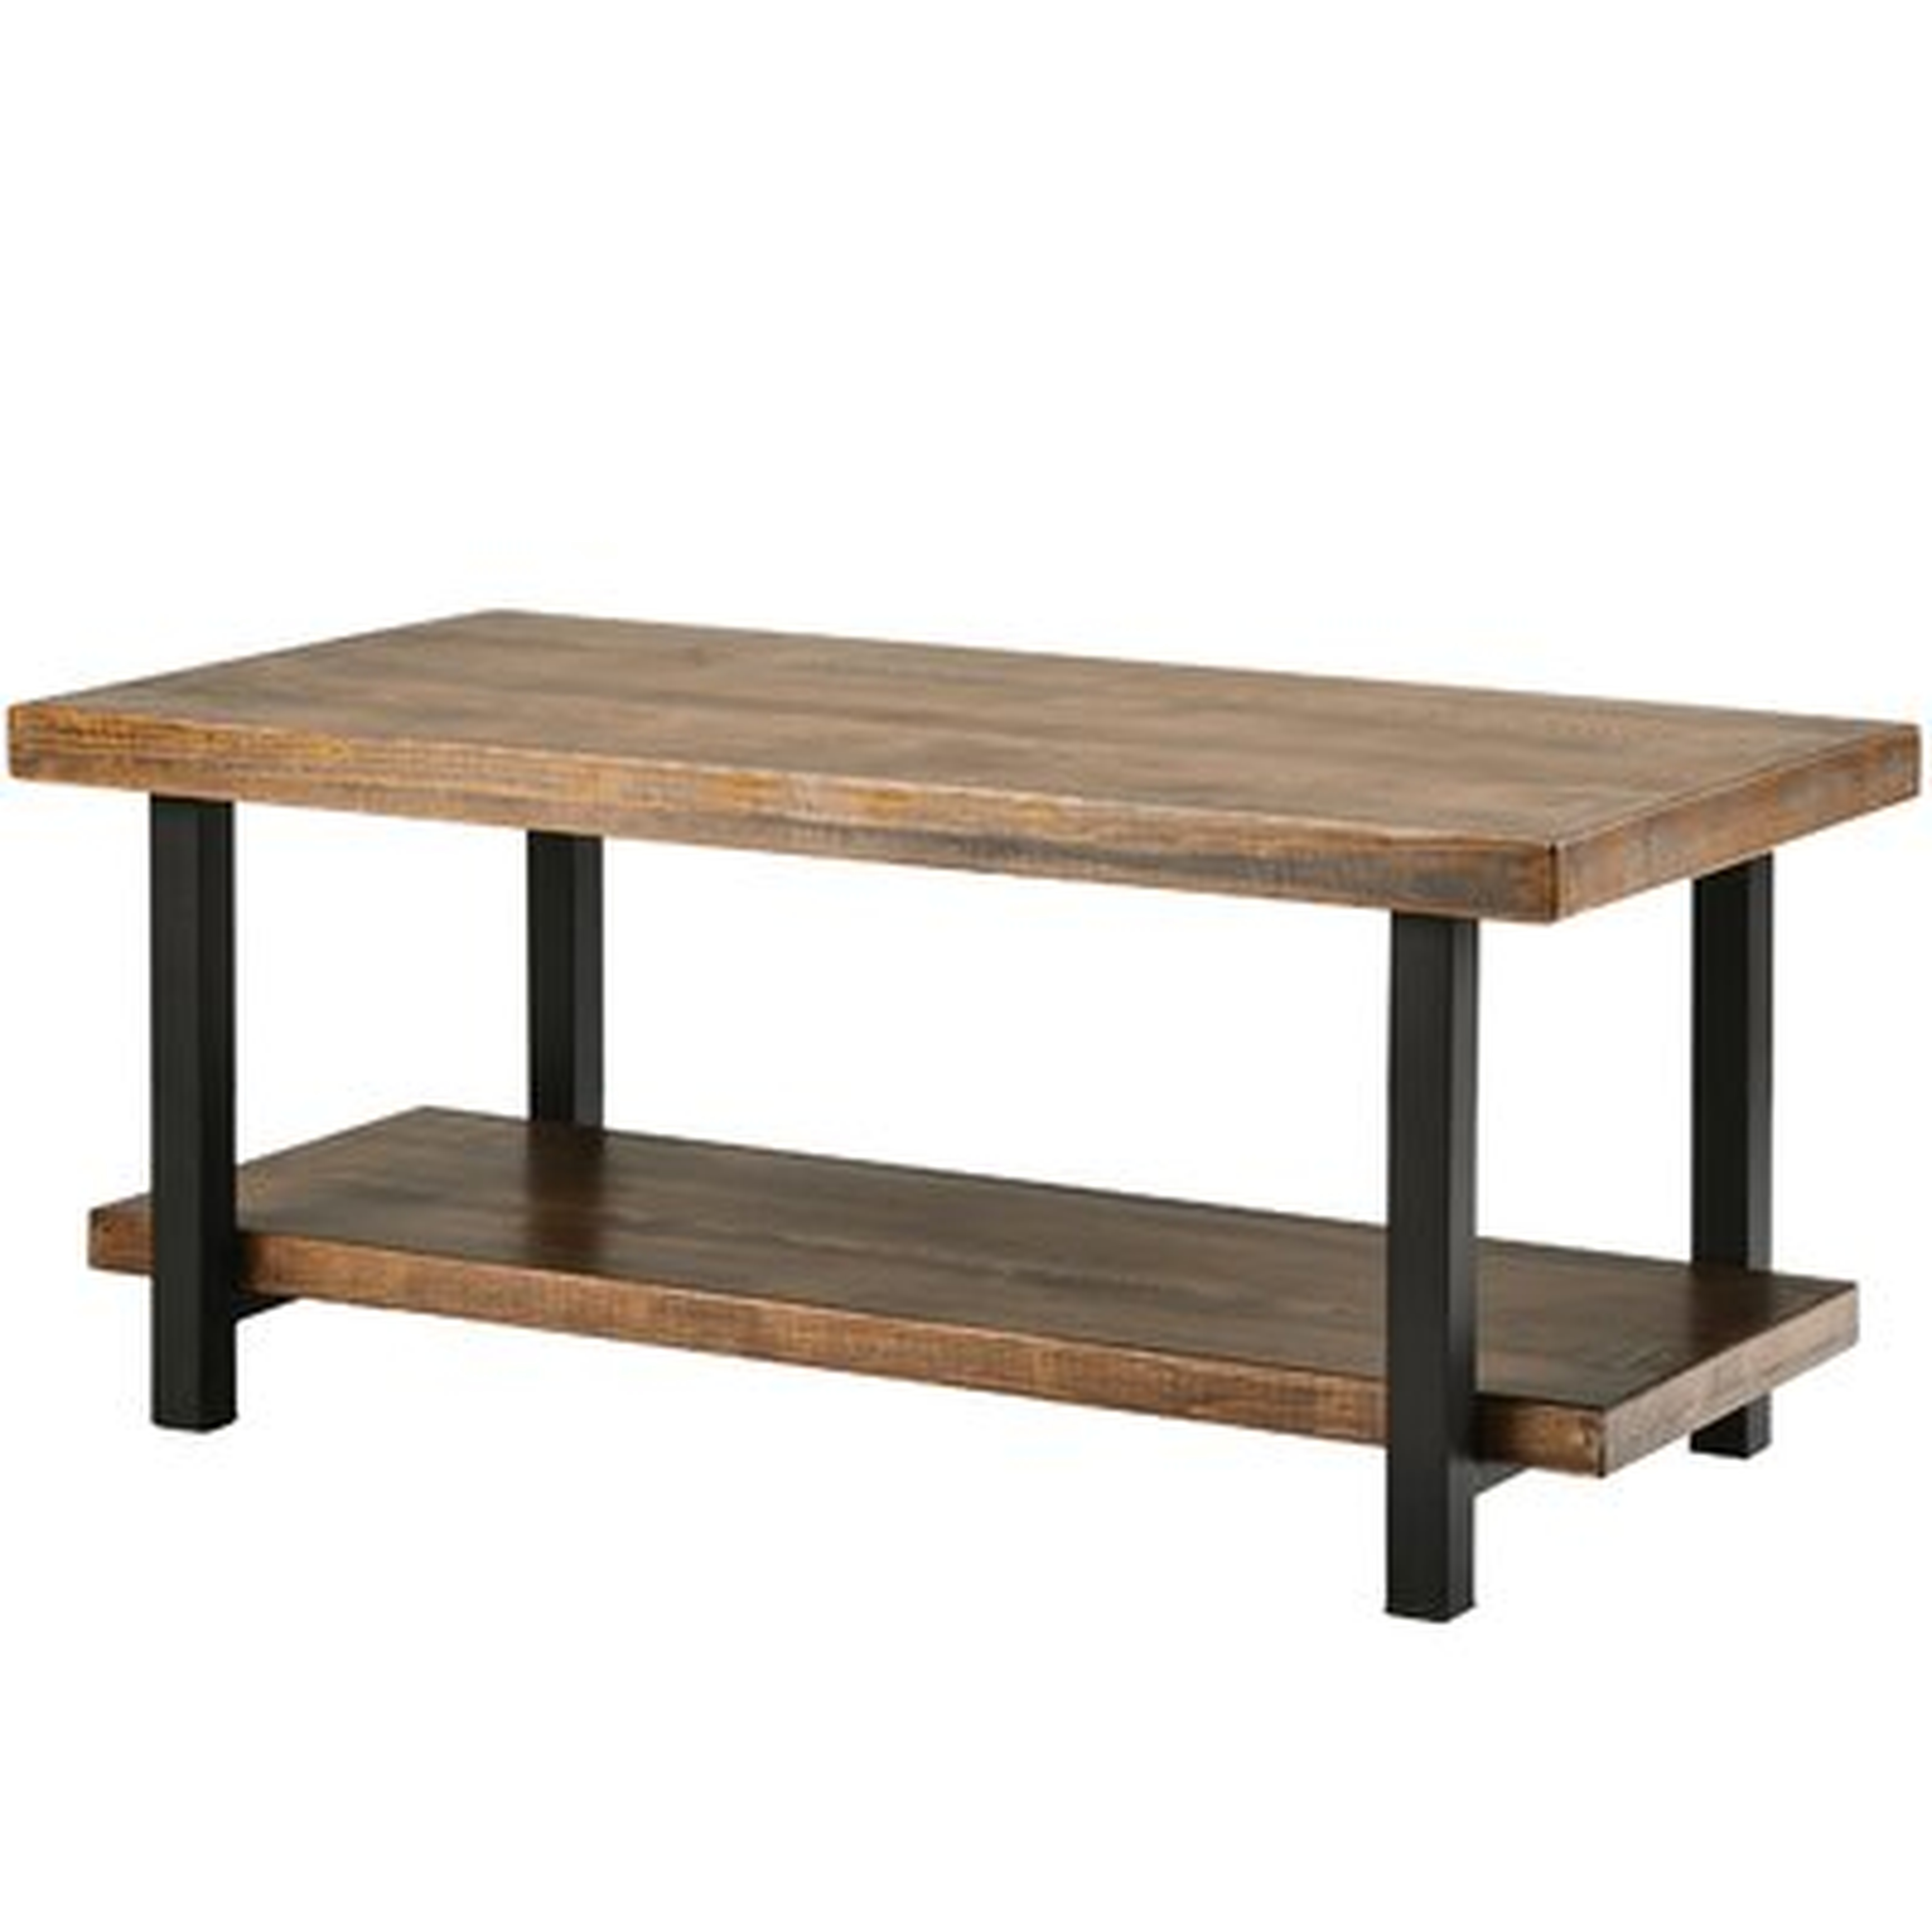 Rustic Natural Coffee Table With Storage Shelf,Rectangle - Wayfair